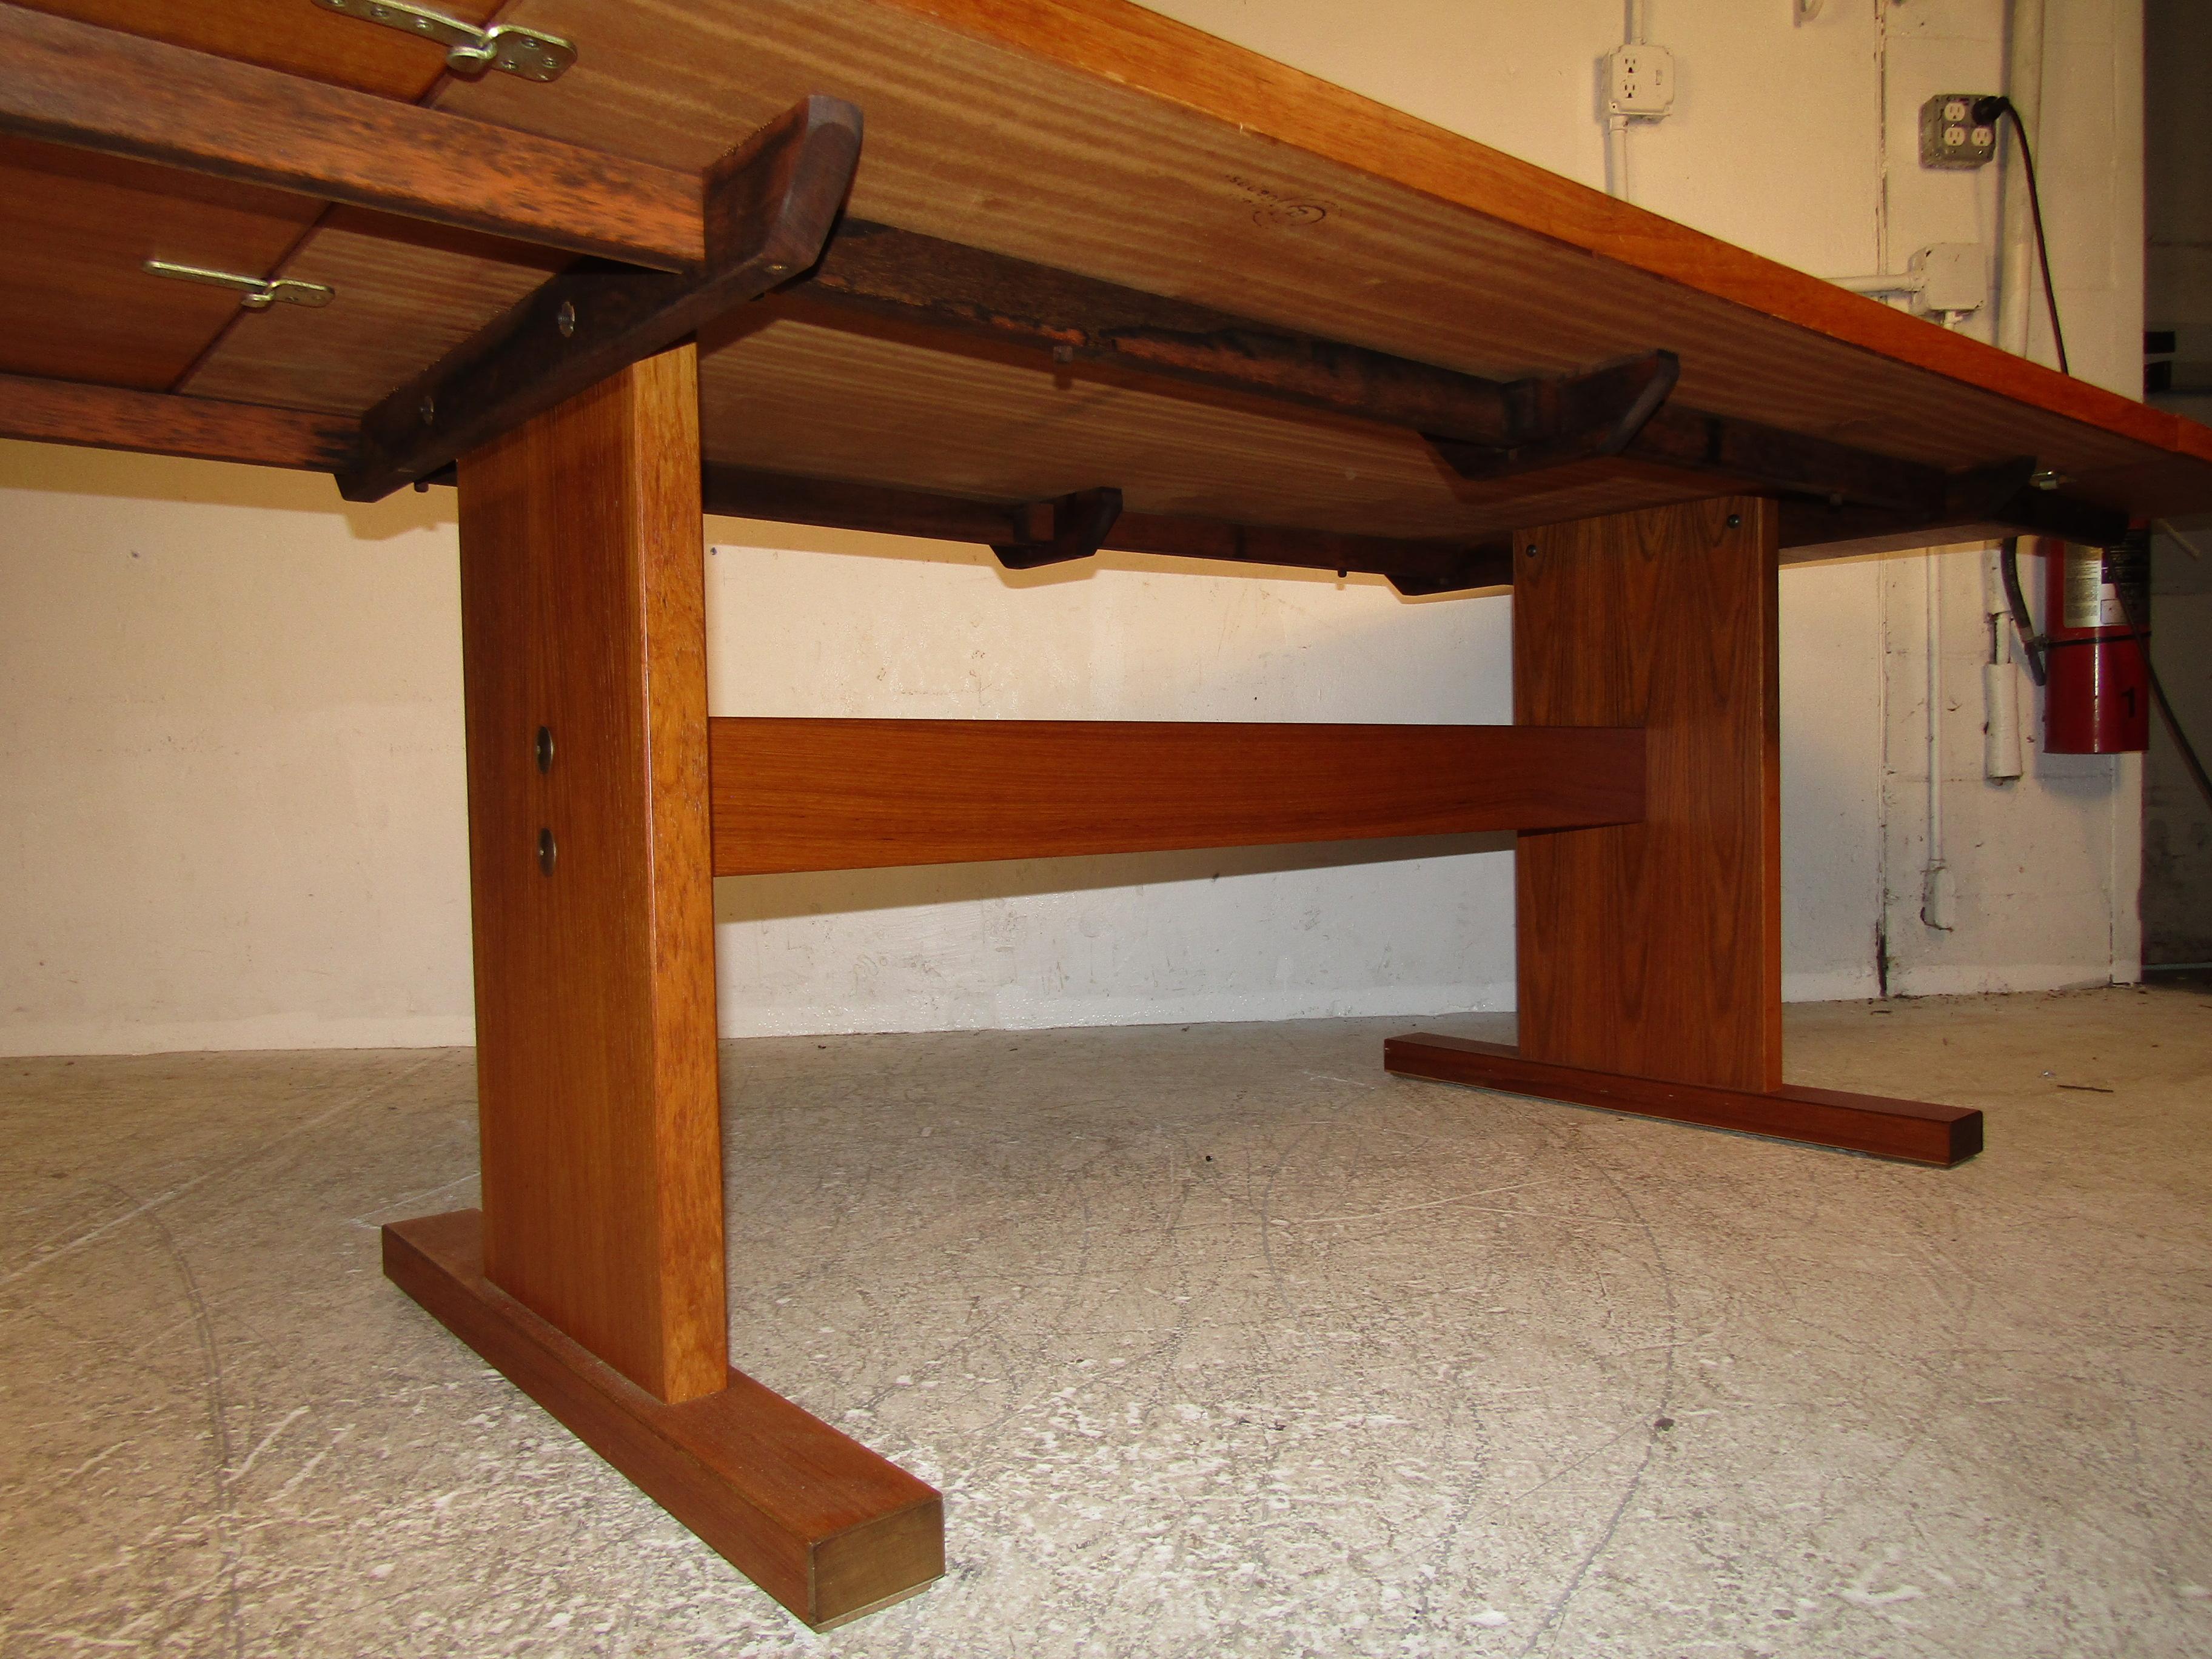 Veneer Danish Modern Drop-Leaf Dining Table with Tile Inlays For Sale